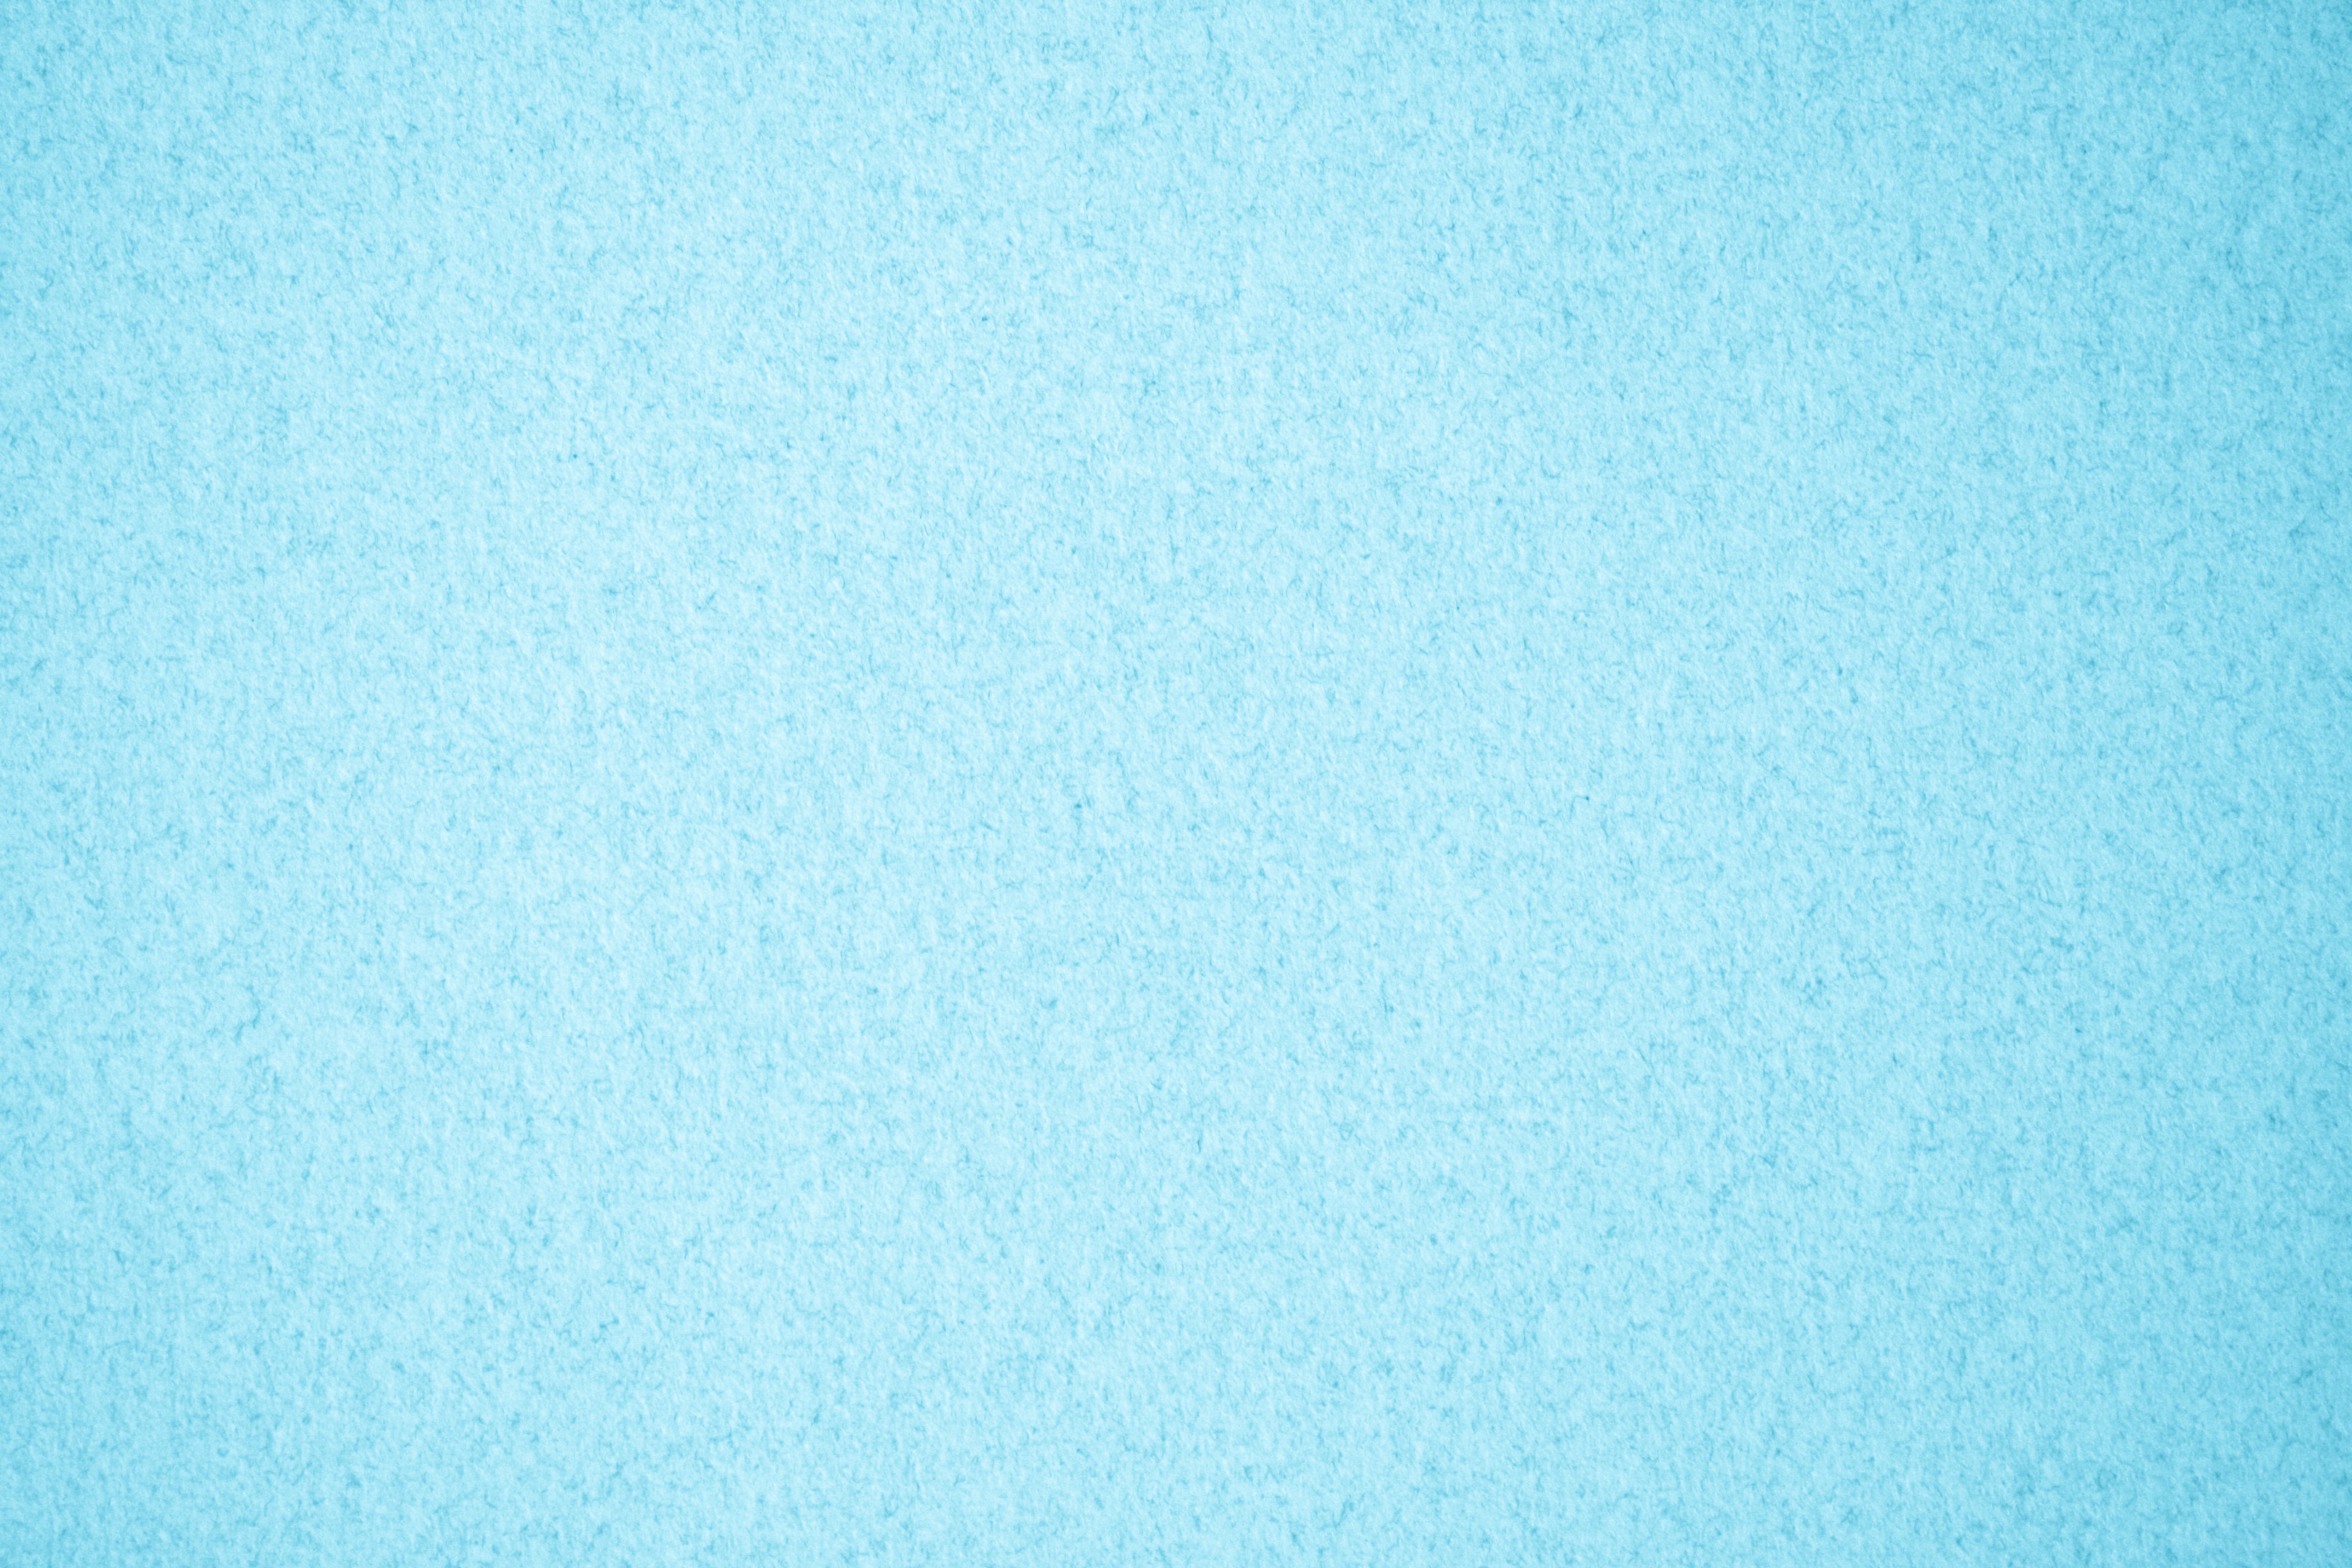 Baby Blue Speckled Paper Texture Picture Free Photograph Photos